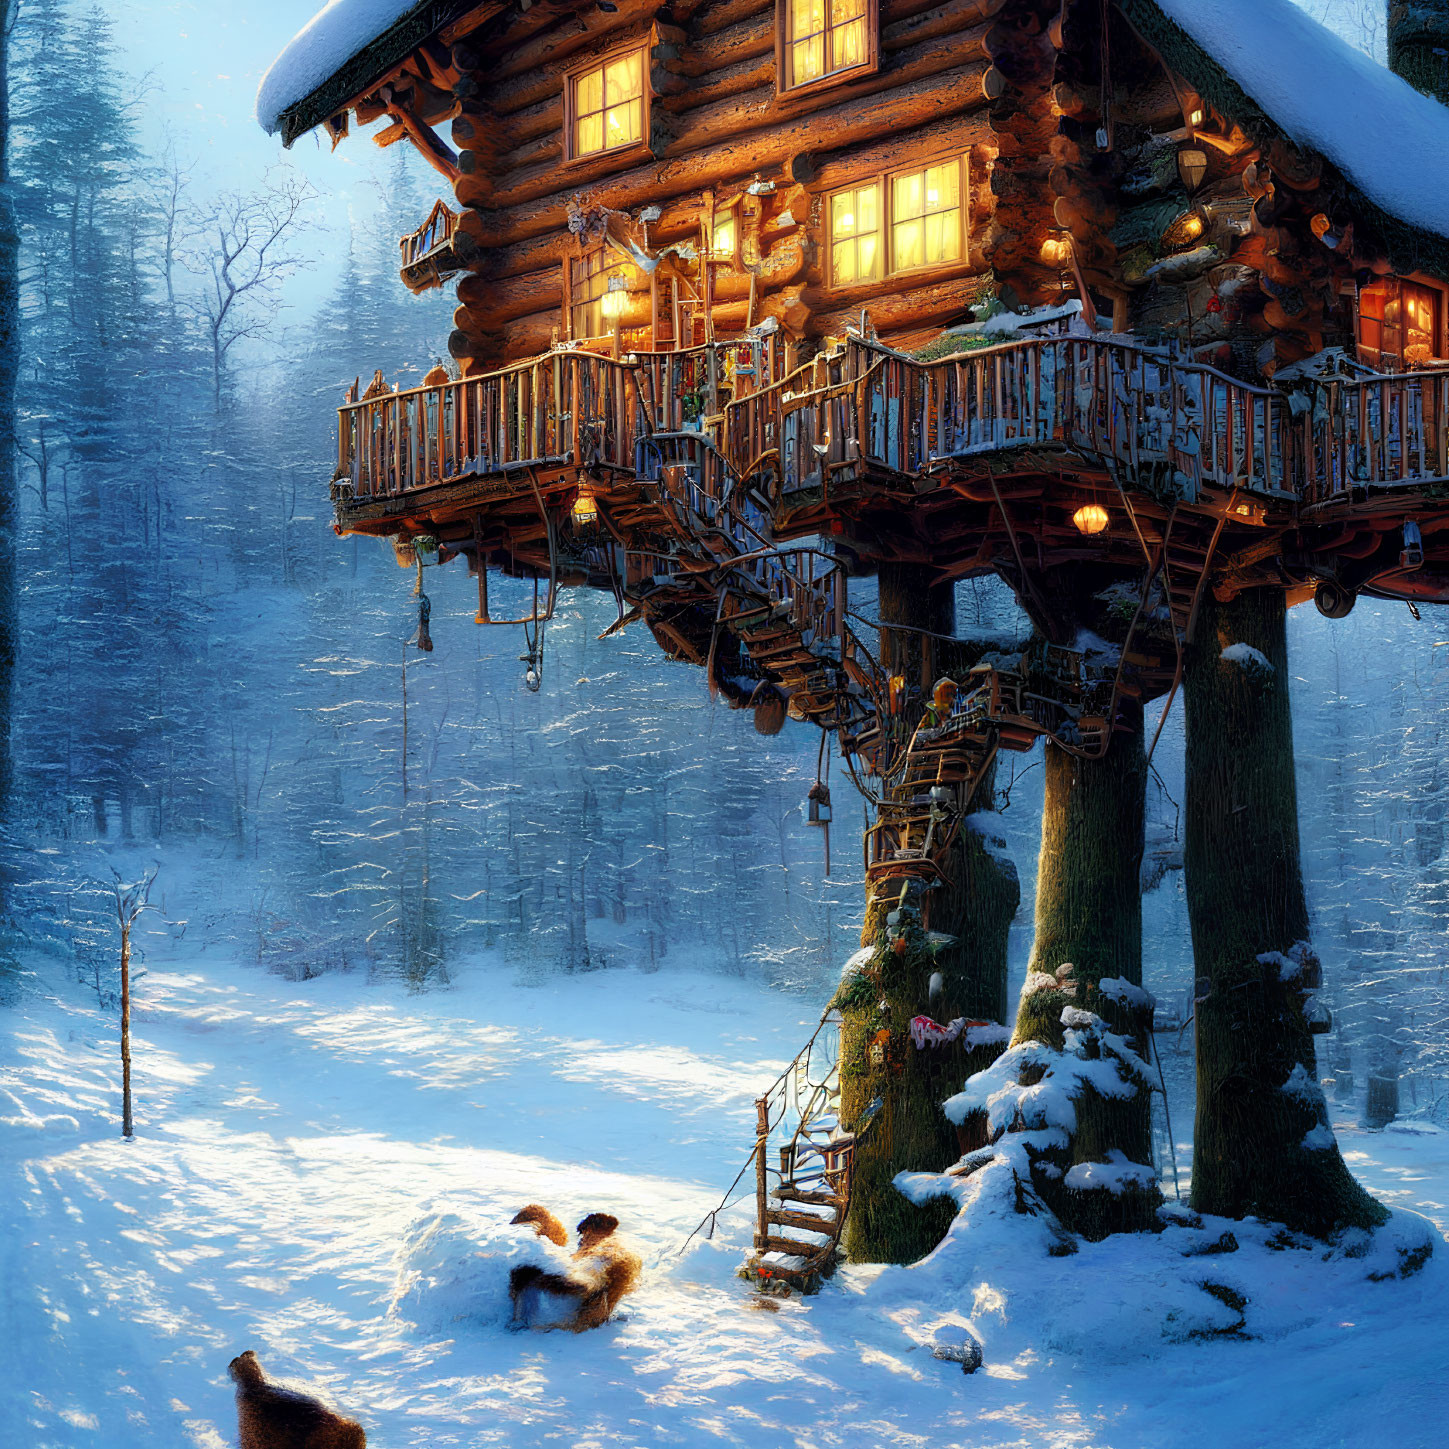 Illuminated snow-covered treehouse with ladder and dogs in snowy forest at dusk